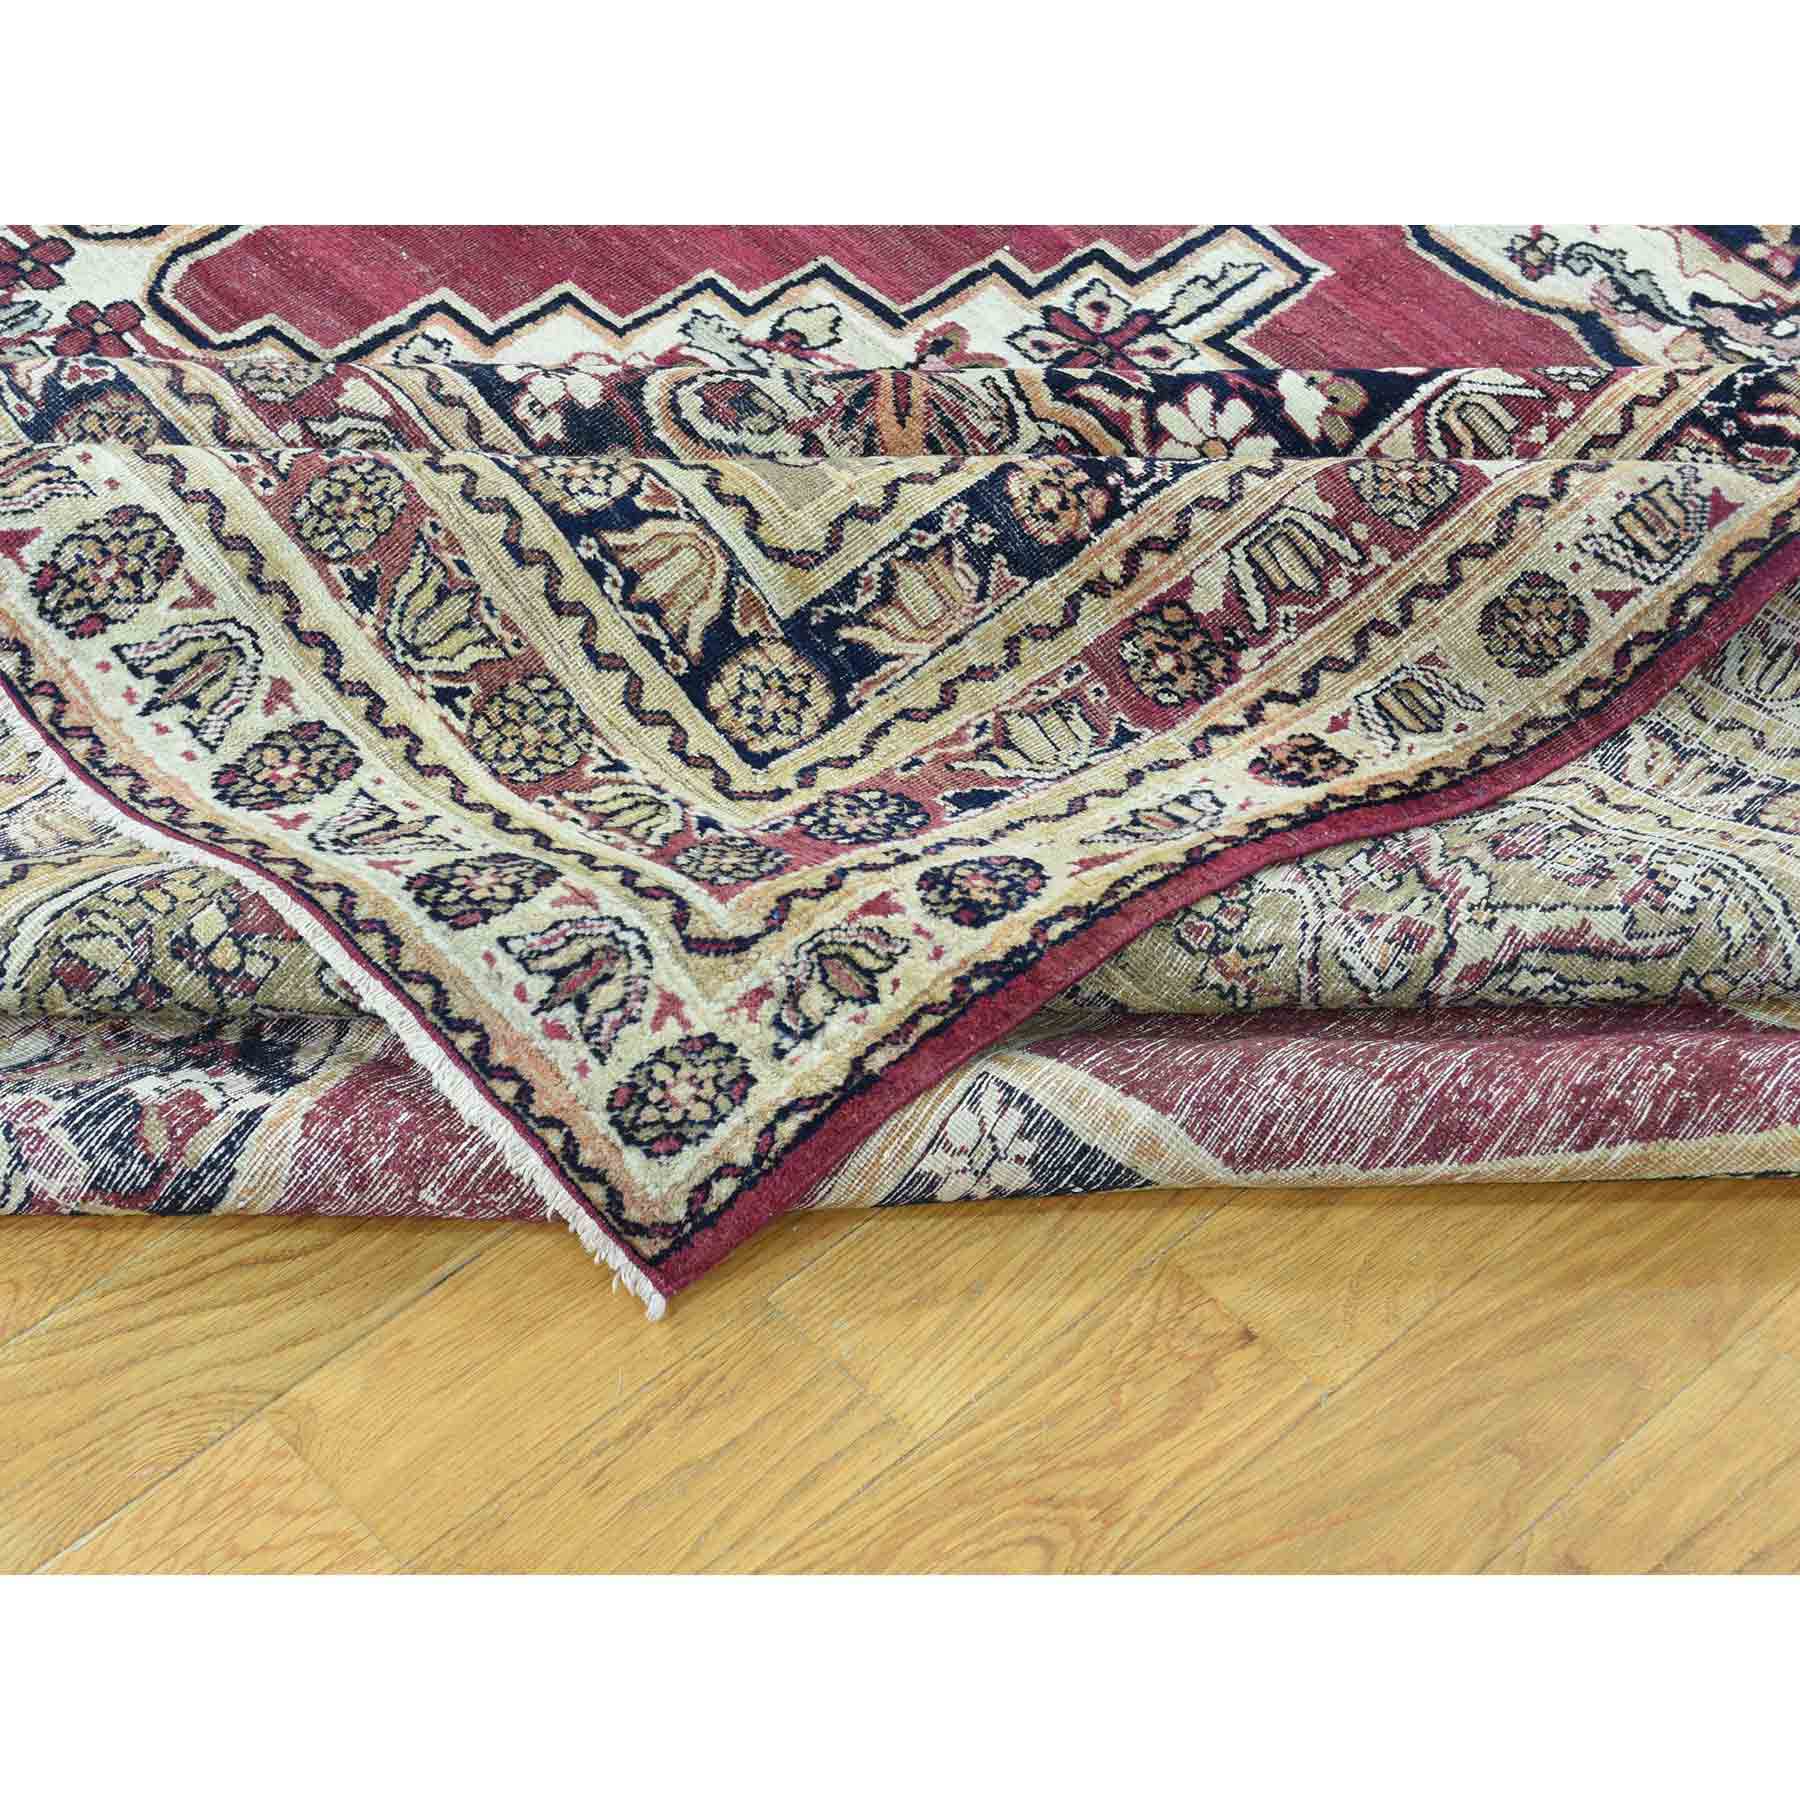 Antique-Hand-Knotted-Rug-160680